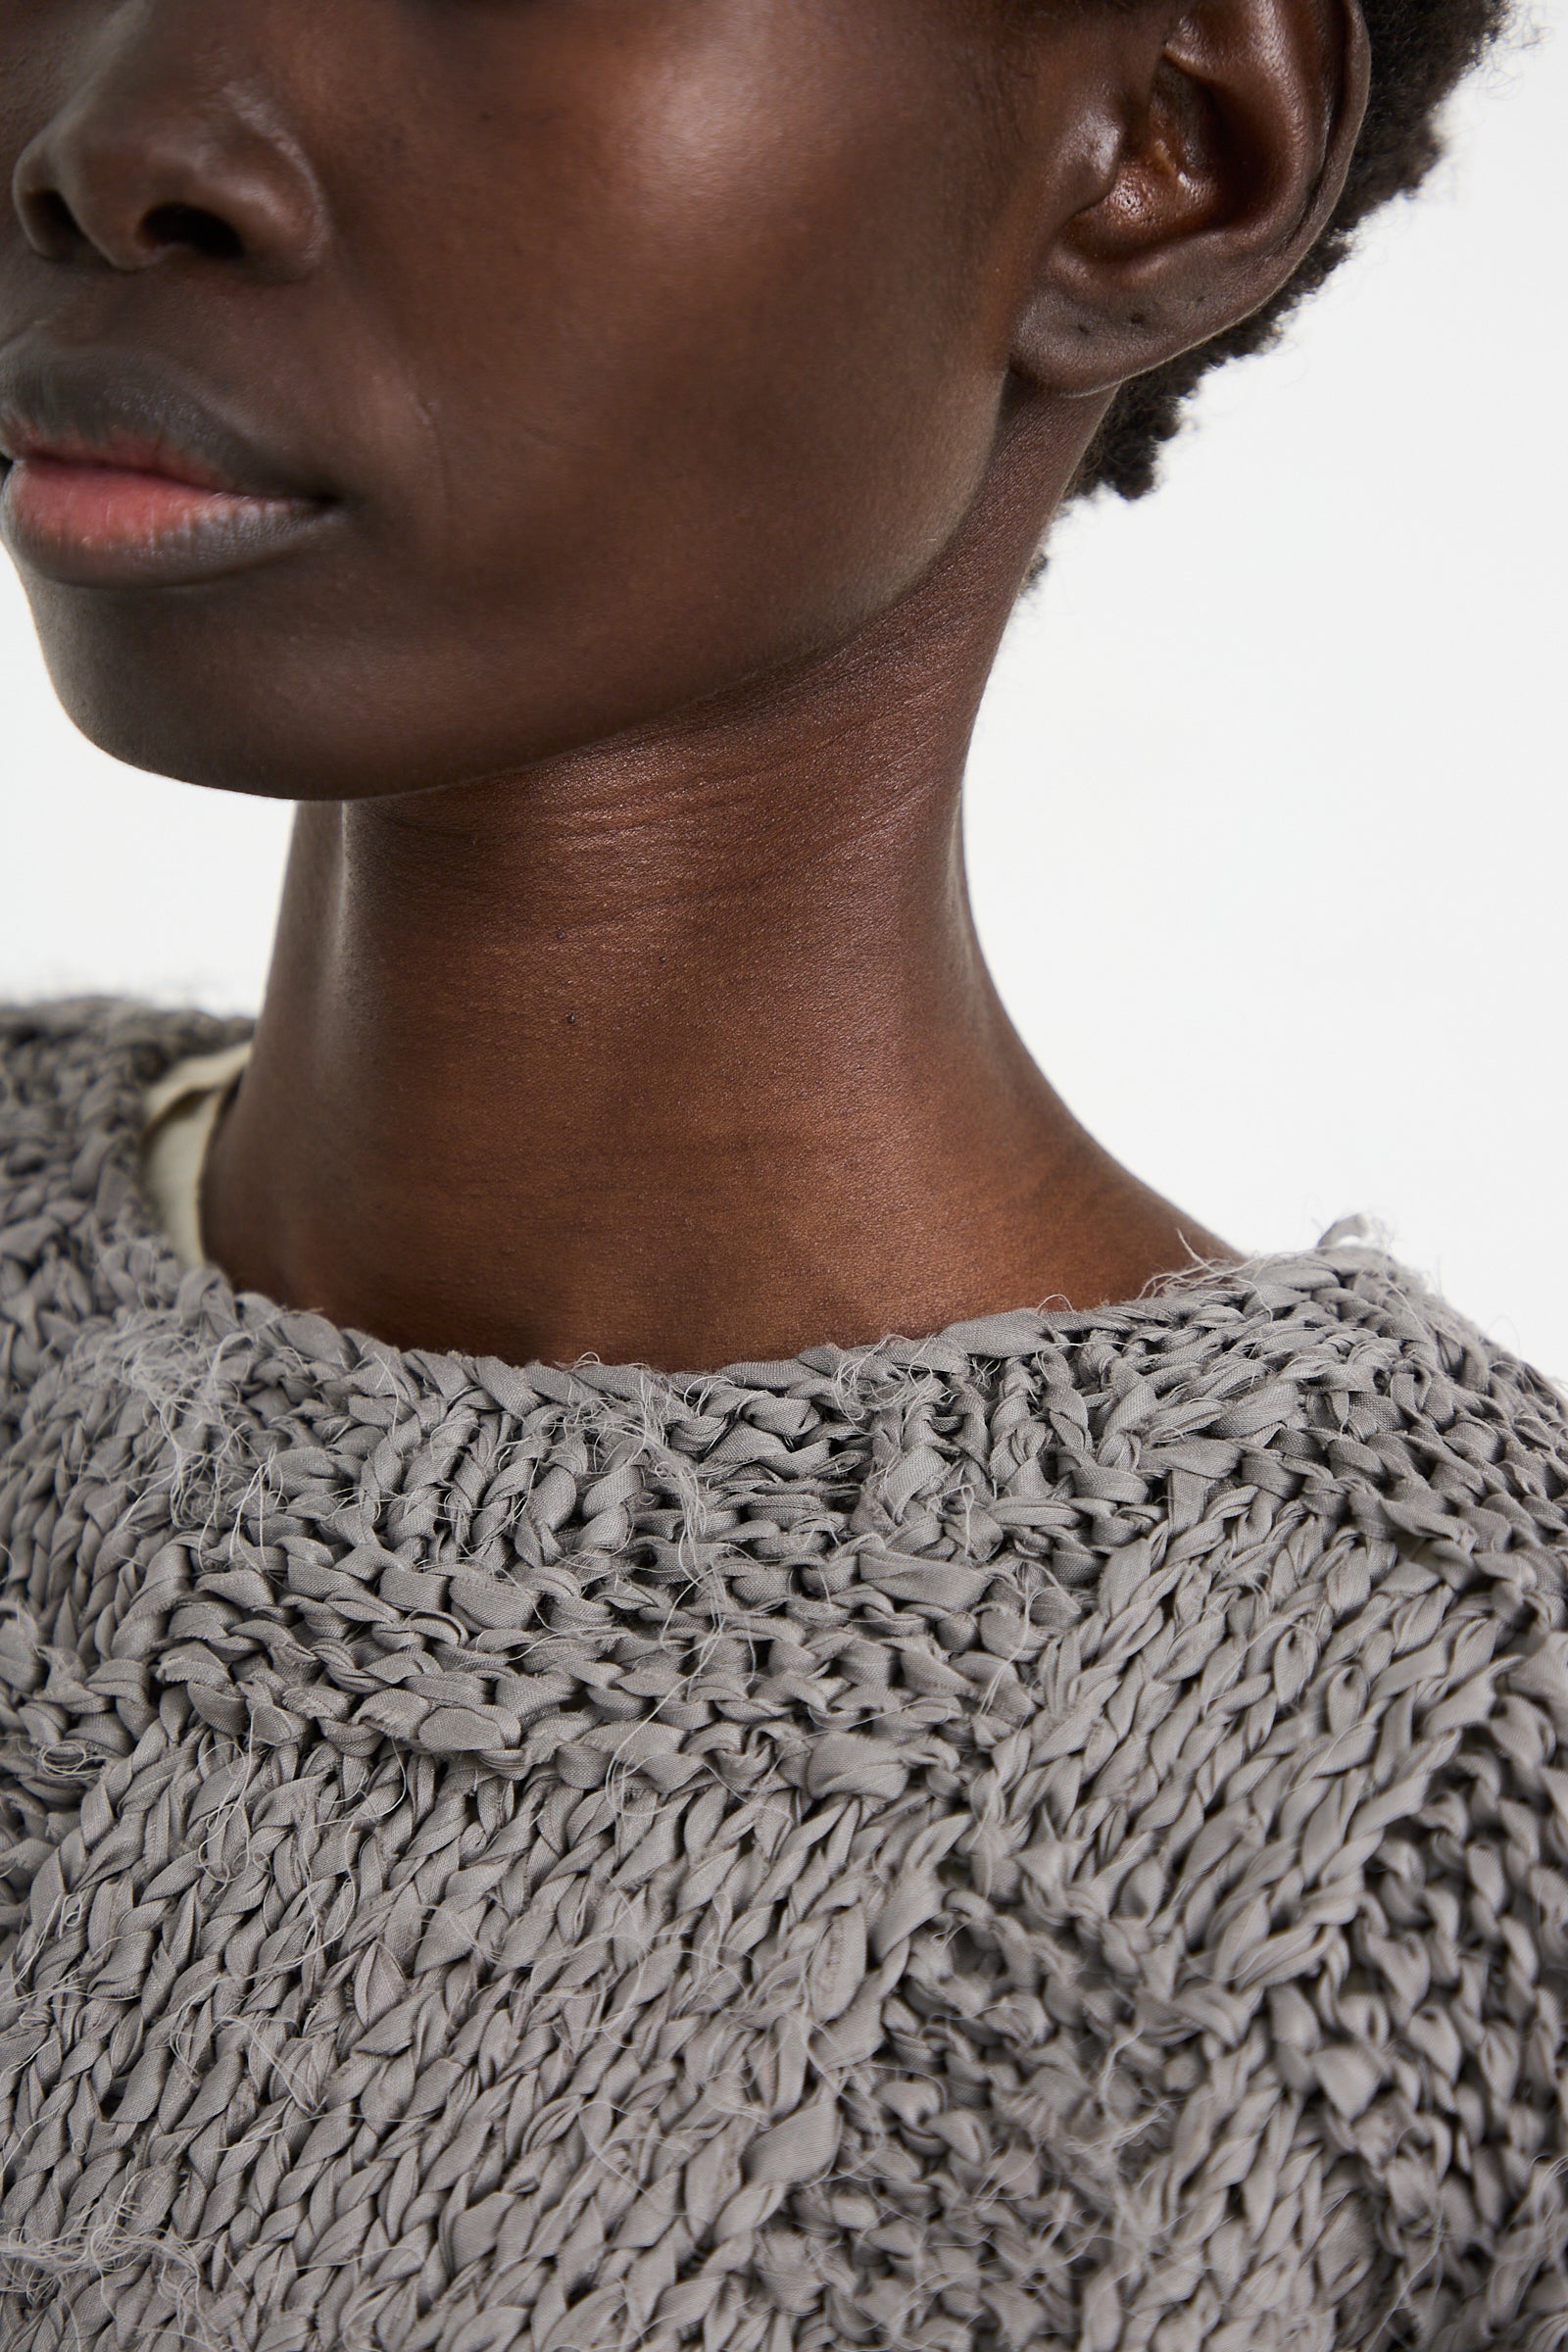 Close-up of a person wearing a Lauren Manoogian Handknit Pullover Sweater in Gris. Only the lower face, neck, and upper chest are visible, showcasing the textured pattern and highlighting the relaxed fit of the knitted garment.